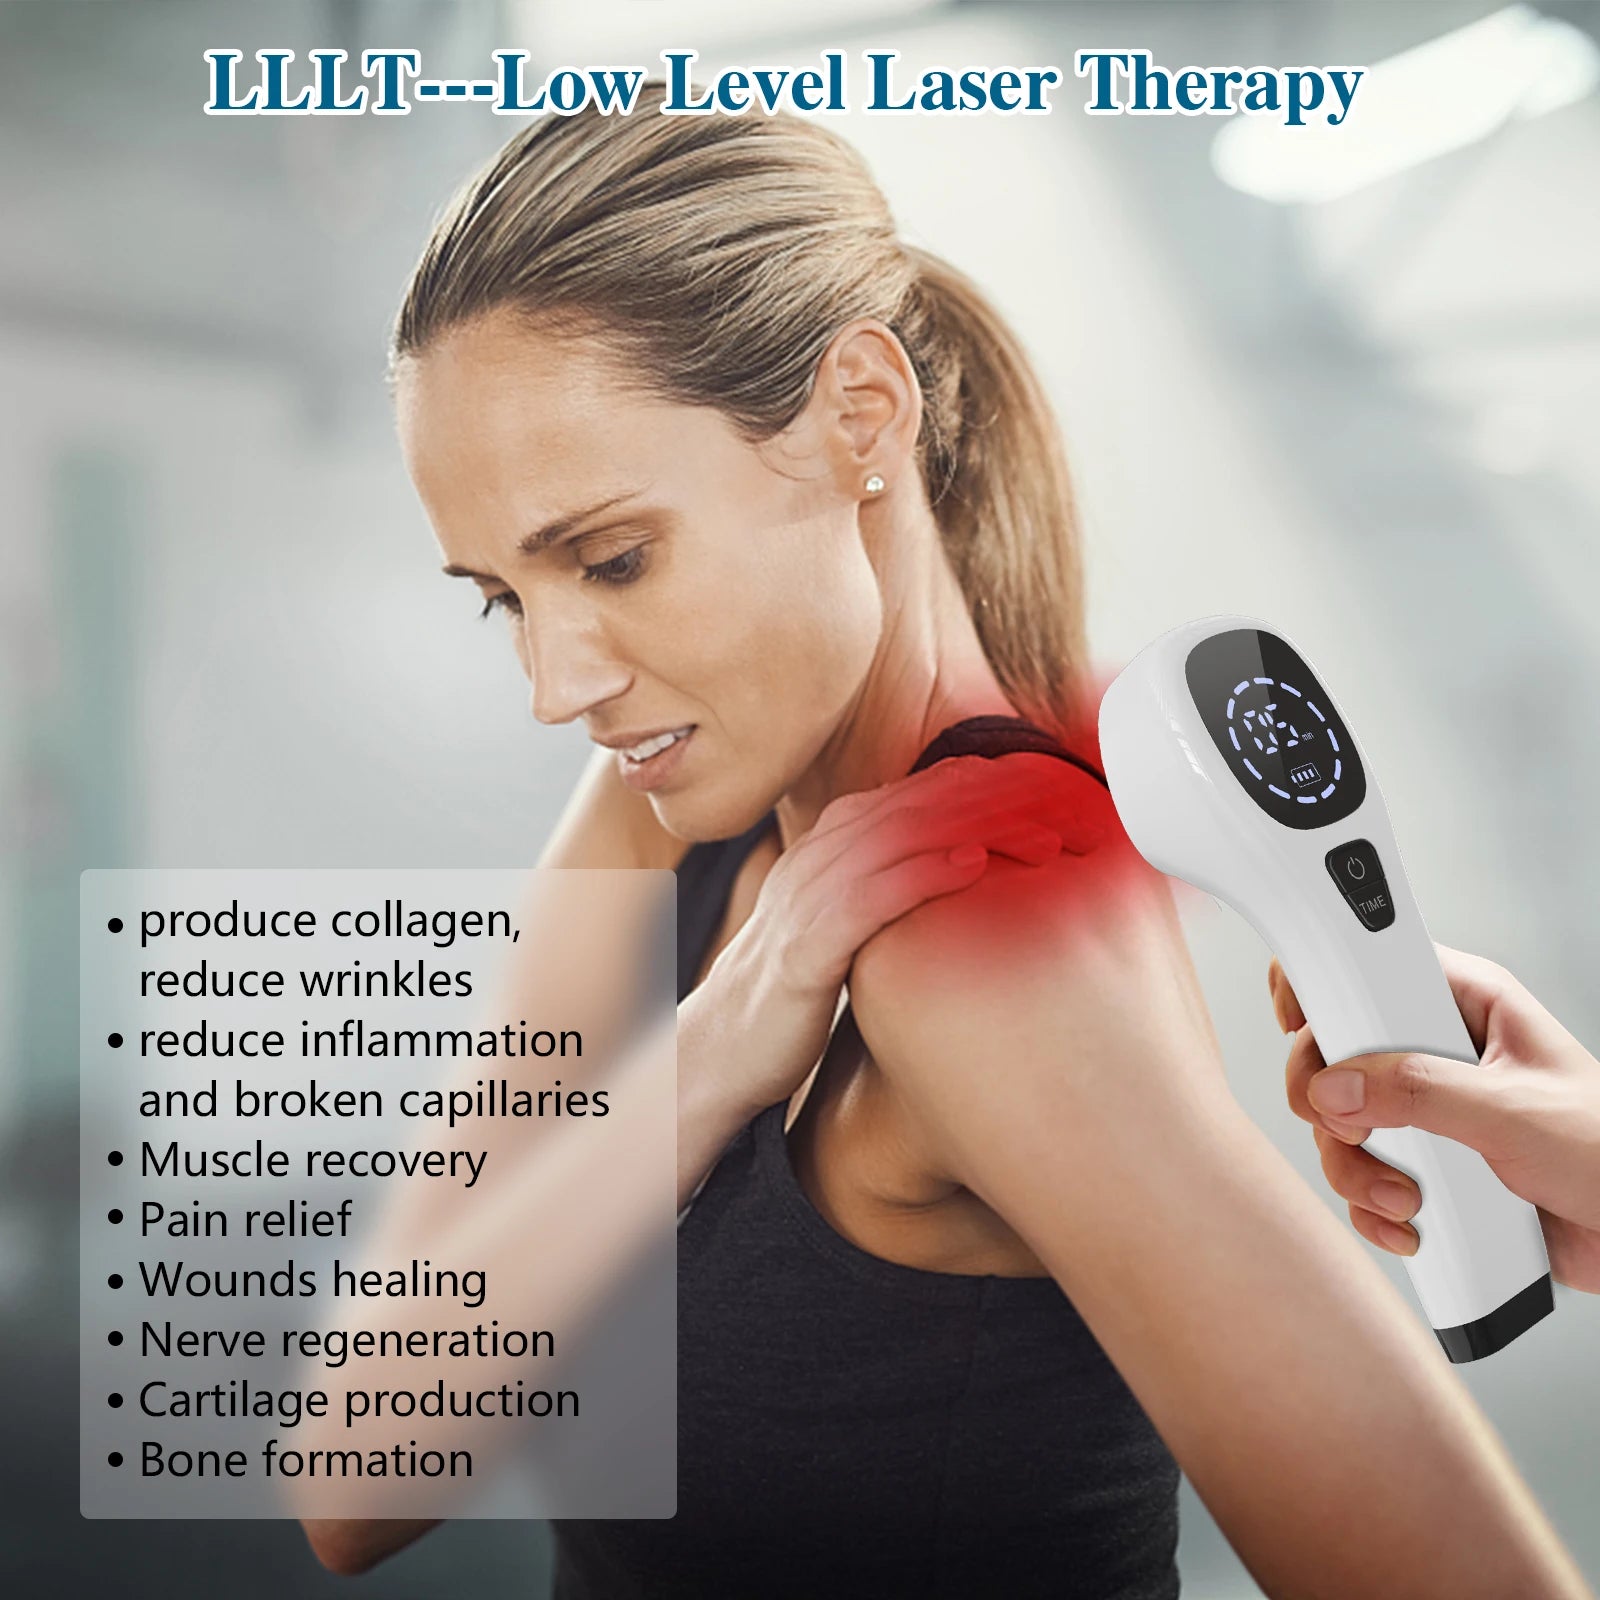 LaserHeal Handheld Cold Laser Therapy Device for rapid pain relief and enhanced healing - non-invasive and drug-free solution